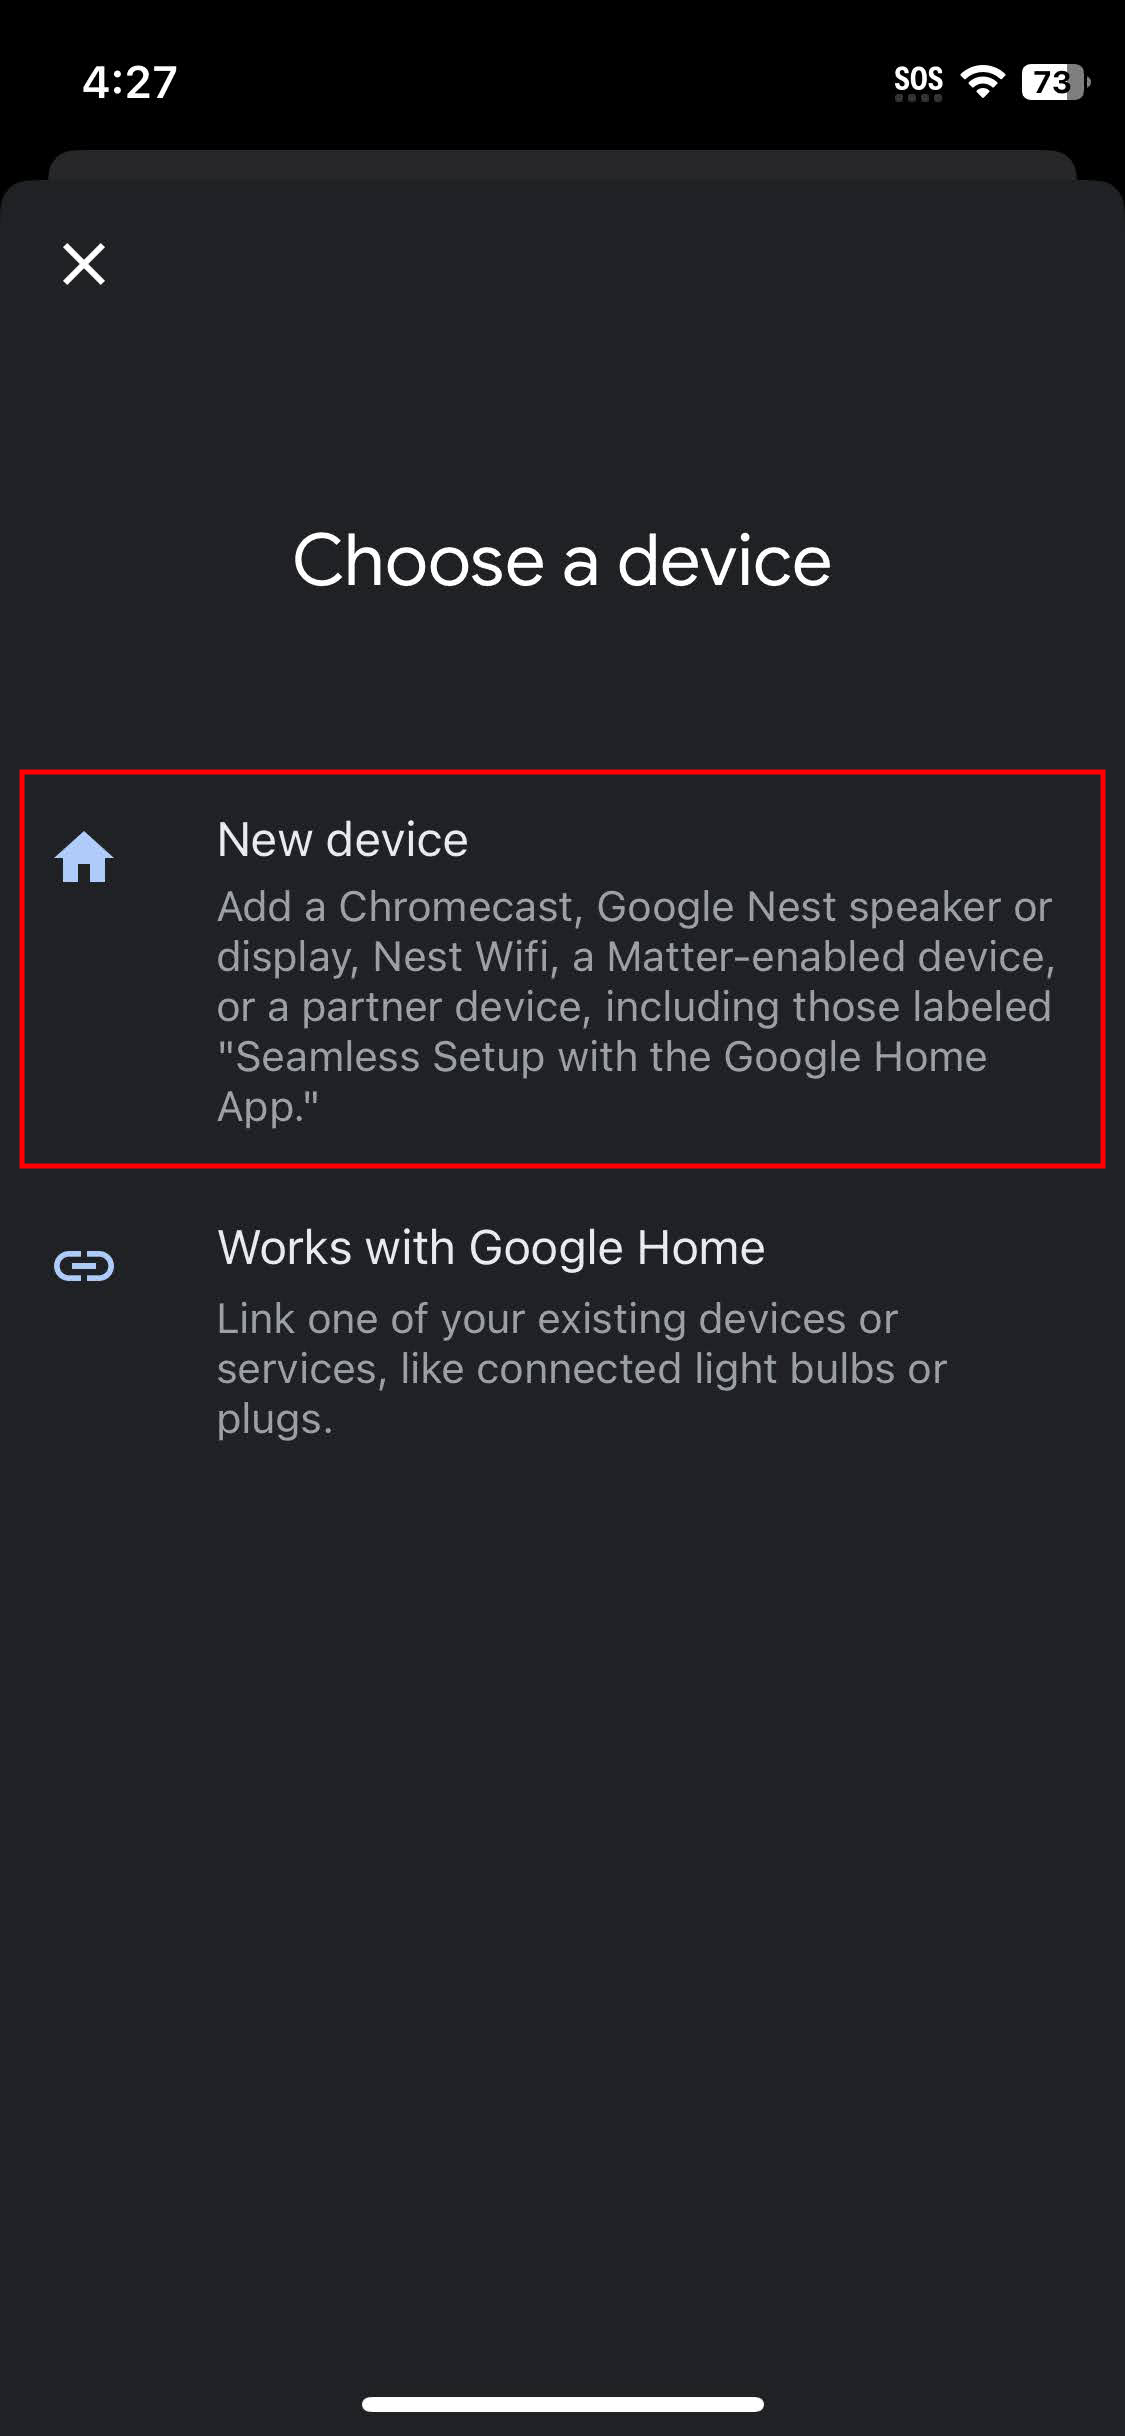 How to set up Chromecast with Google TV using an iPhone (2)